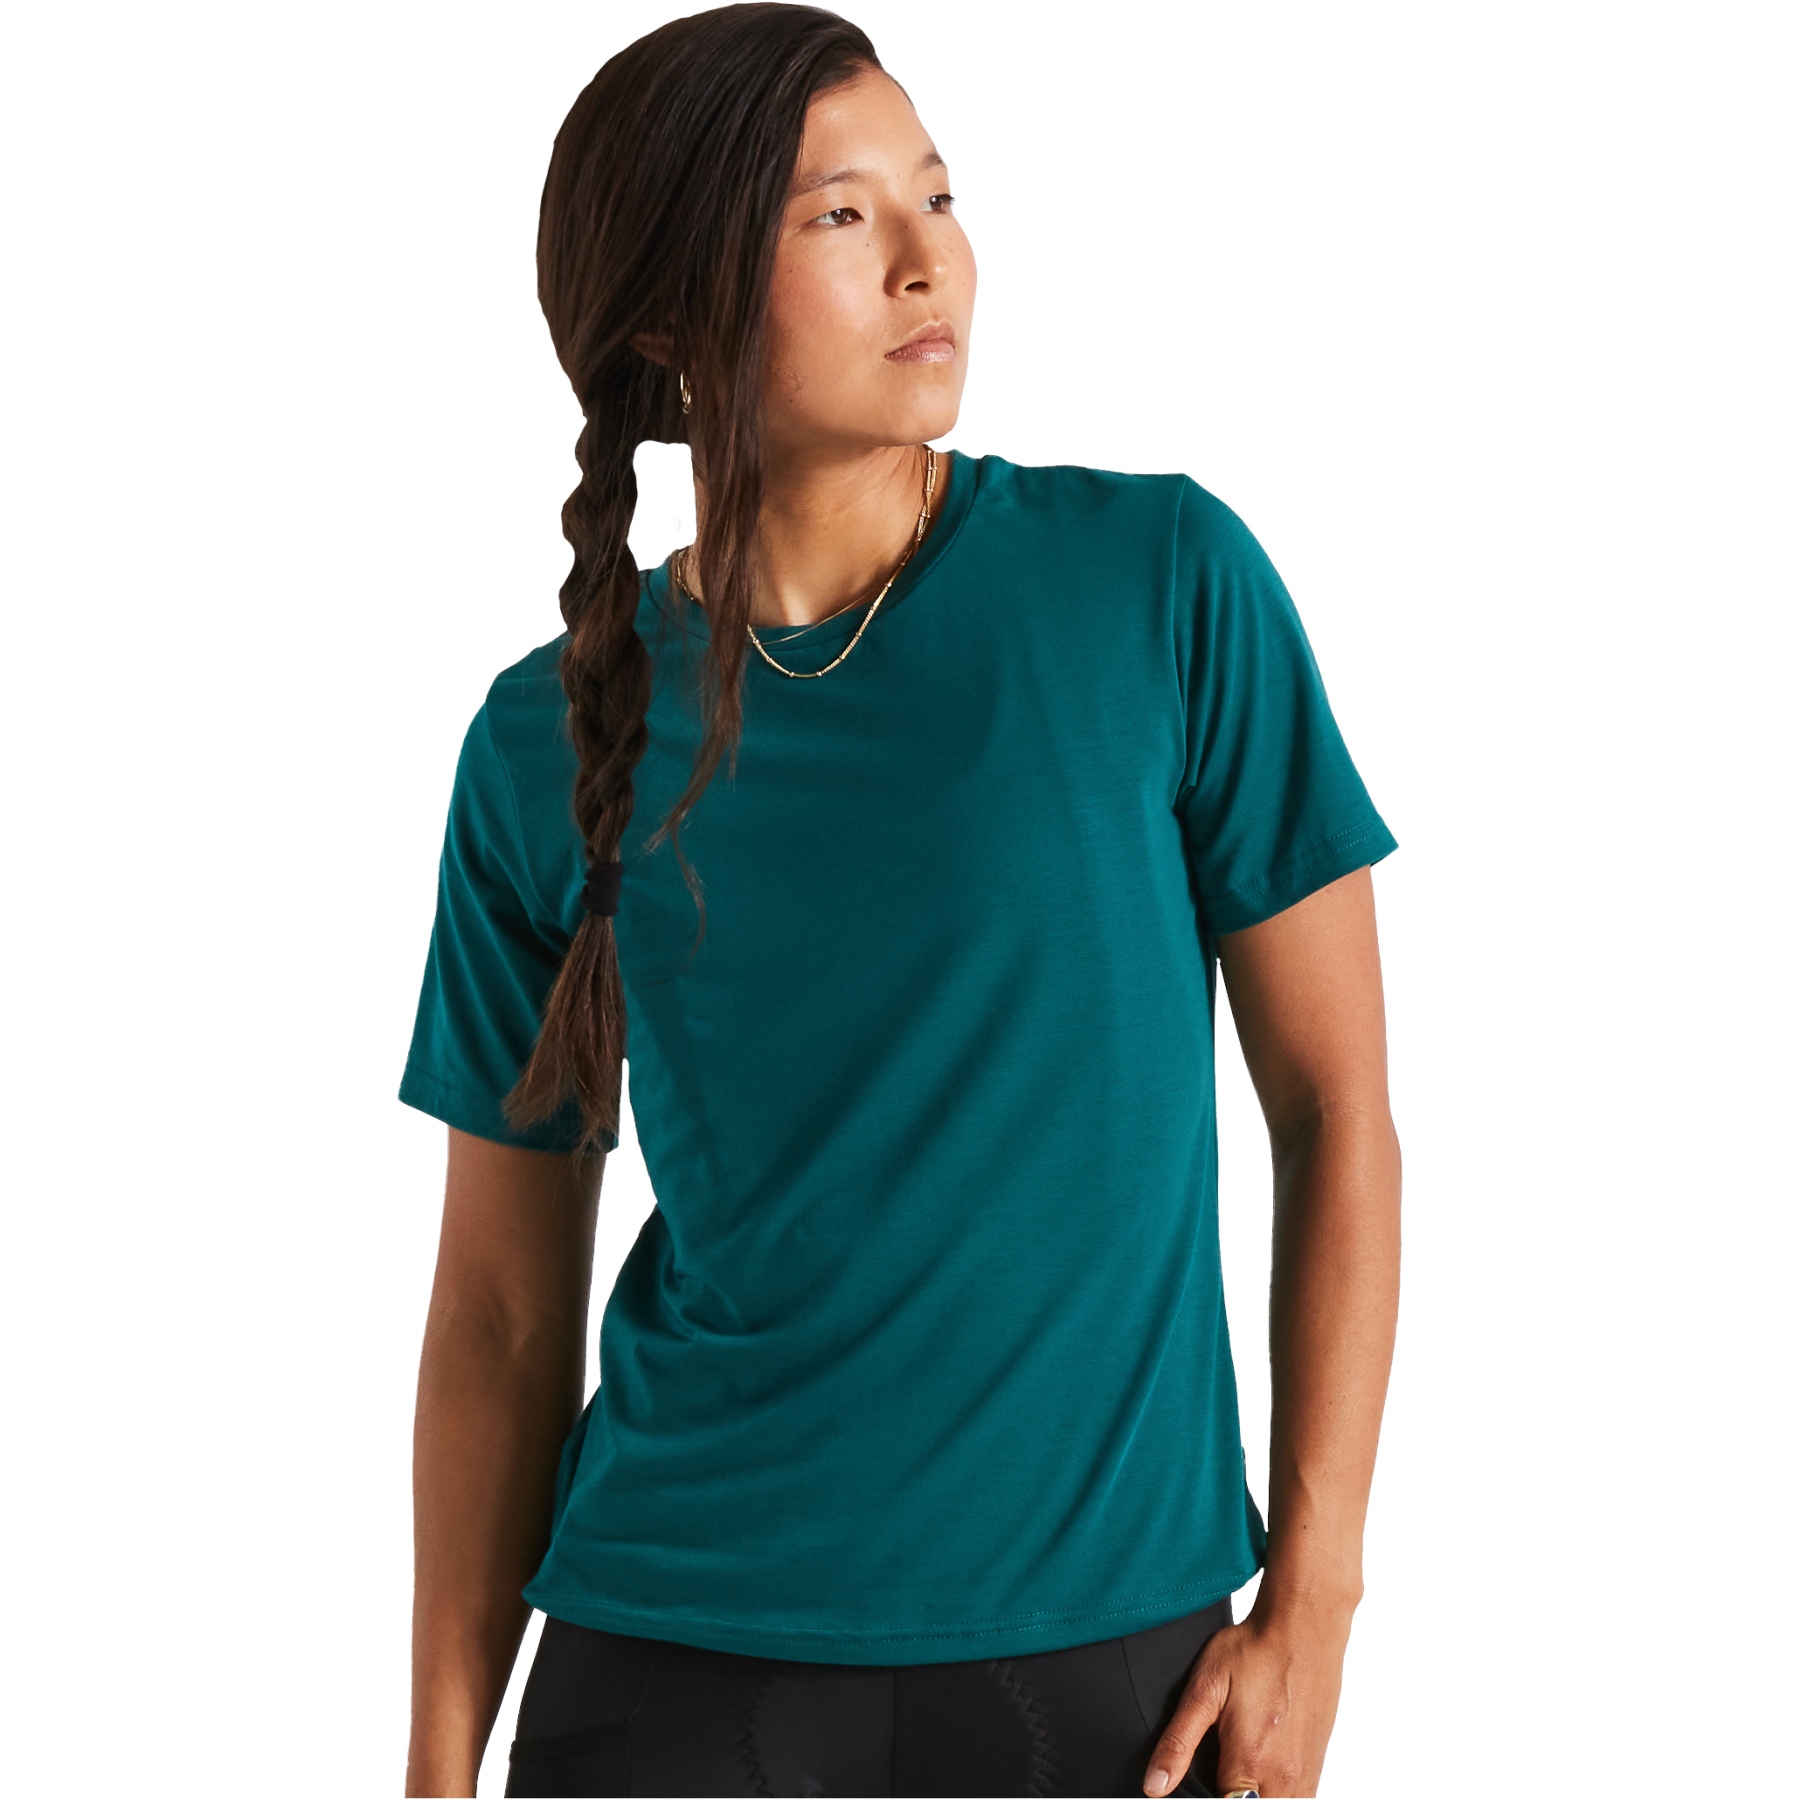 Image of Specialized ADV Air Short Sleeve Jersey Women - tropical teal